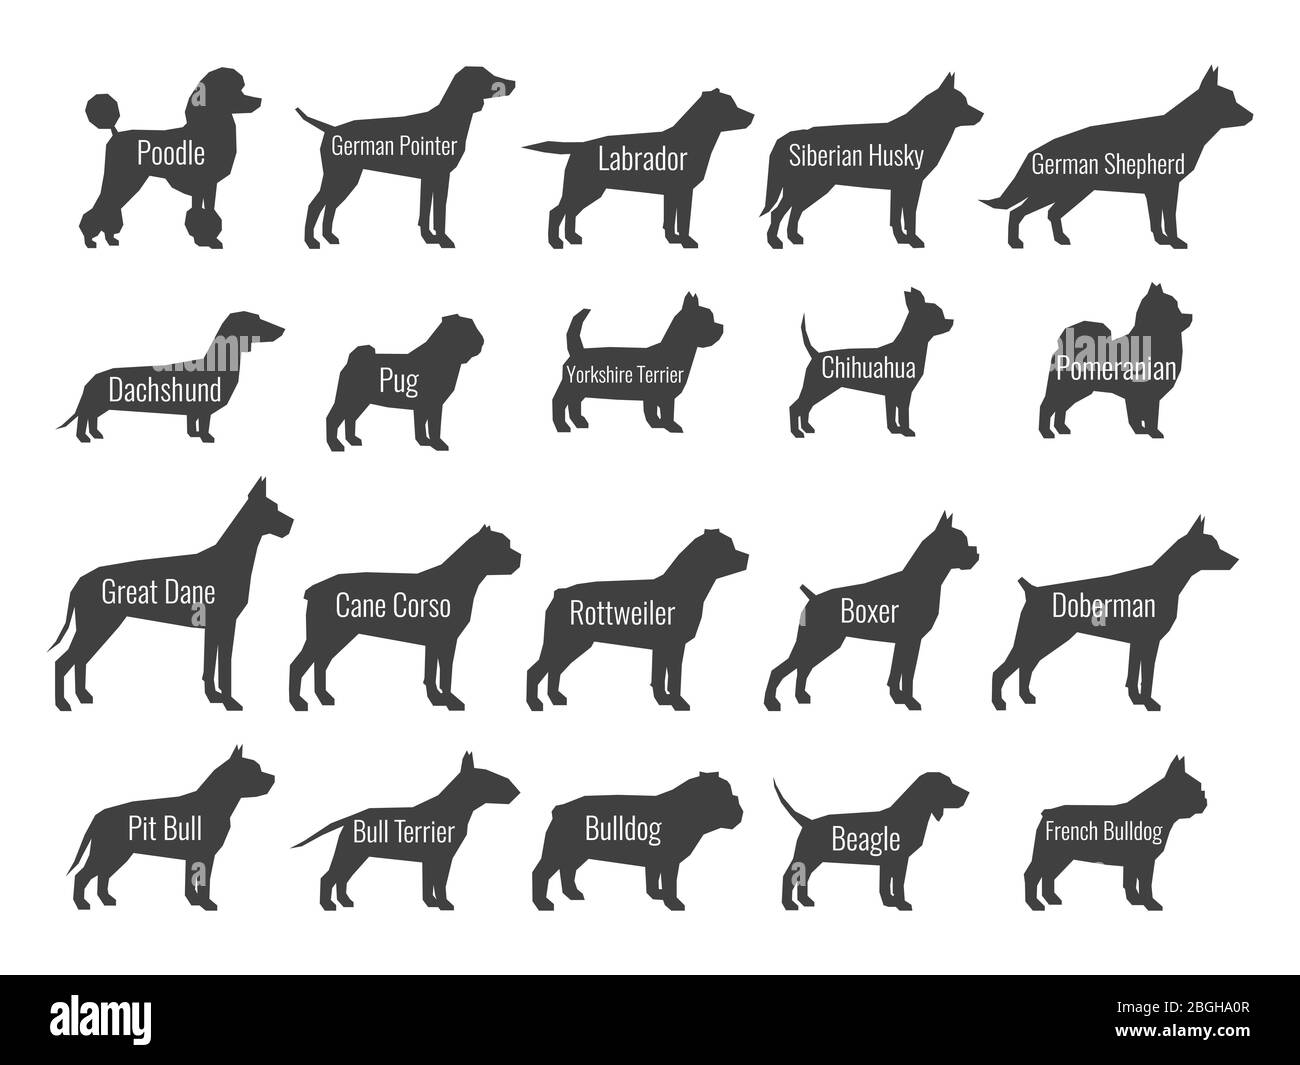 Black dog breeds vector silhouettes isolated on white background. Profile of poodle and labrador, siberian husky and shepherd, dachshund and pug illustration Stock Vector